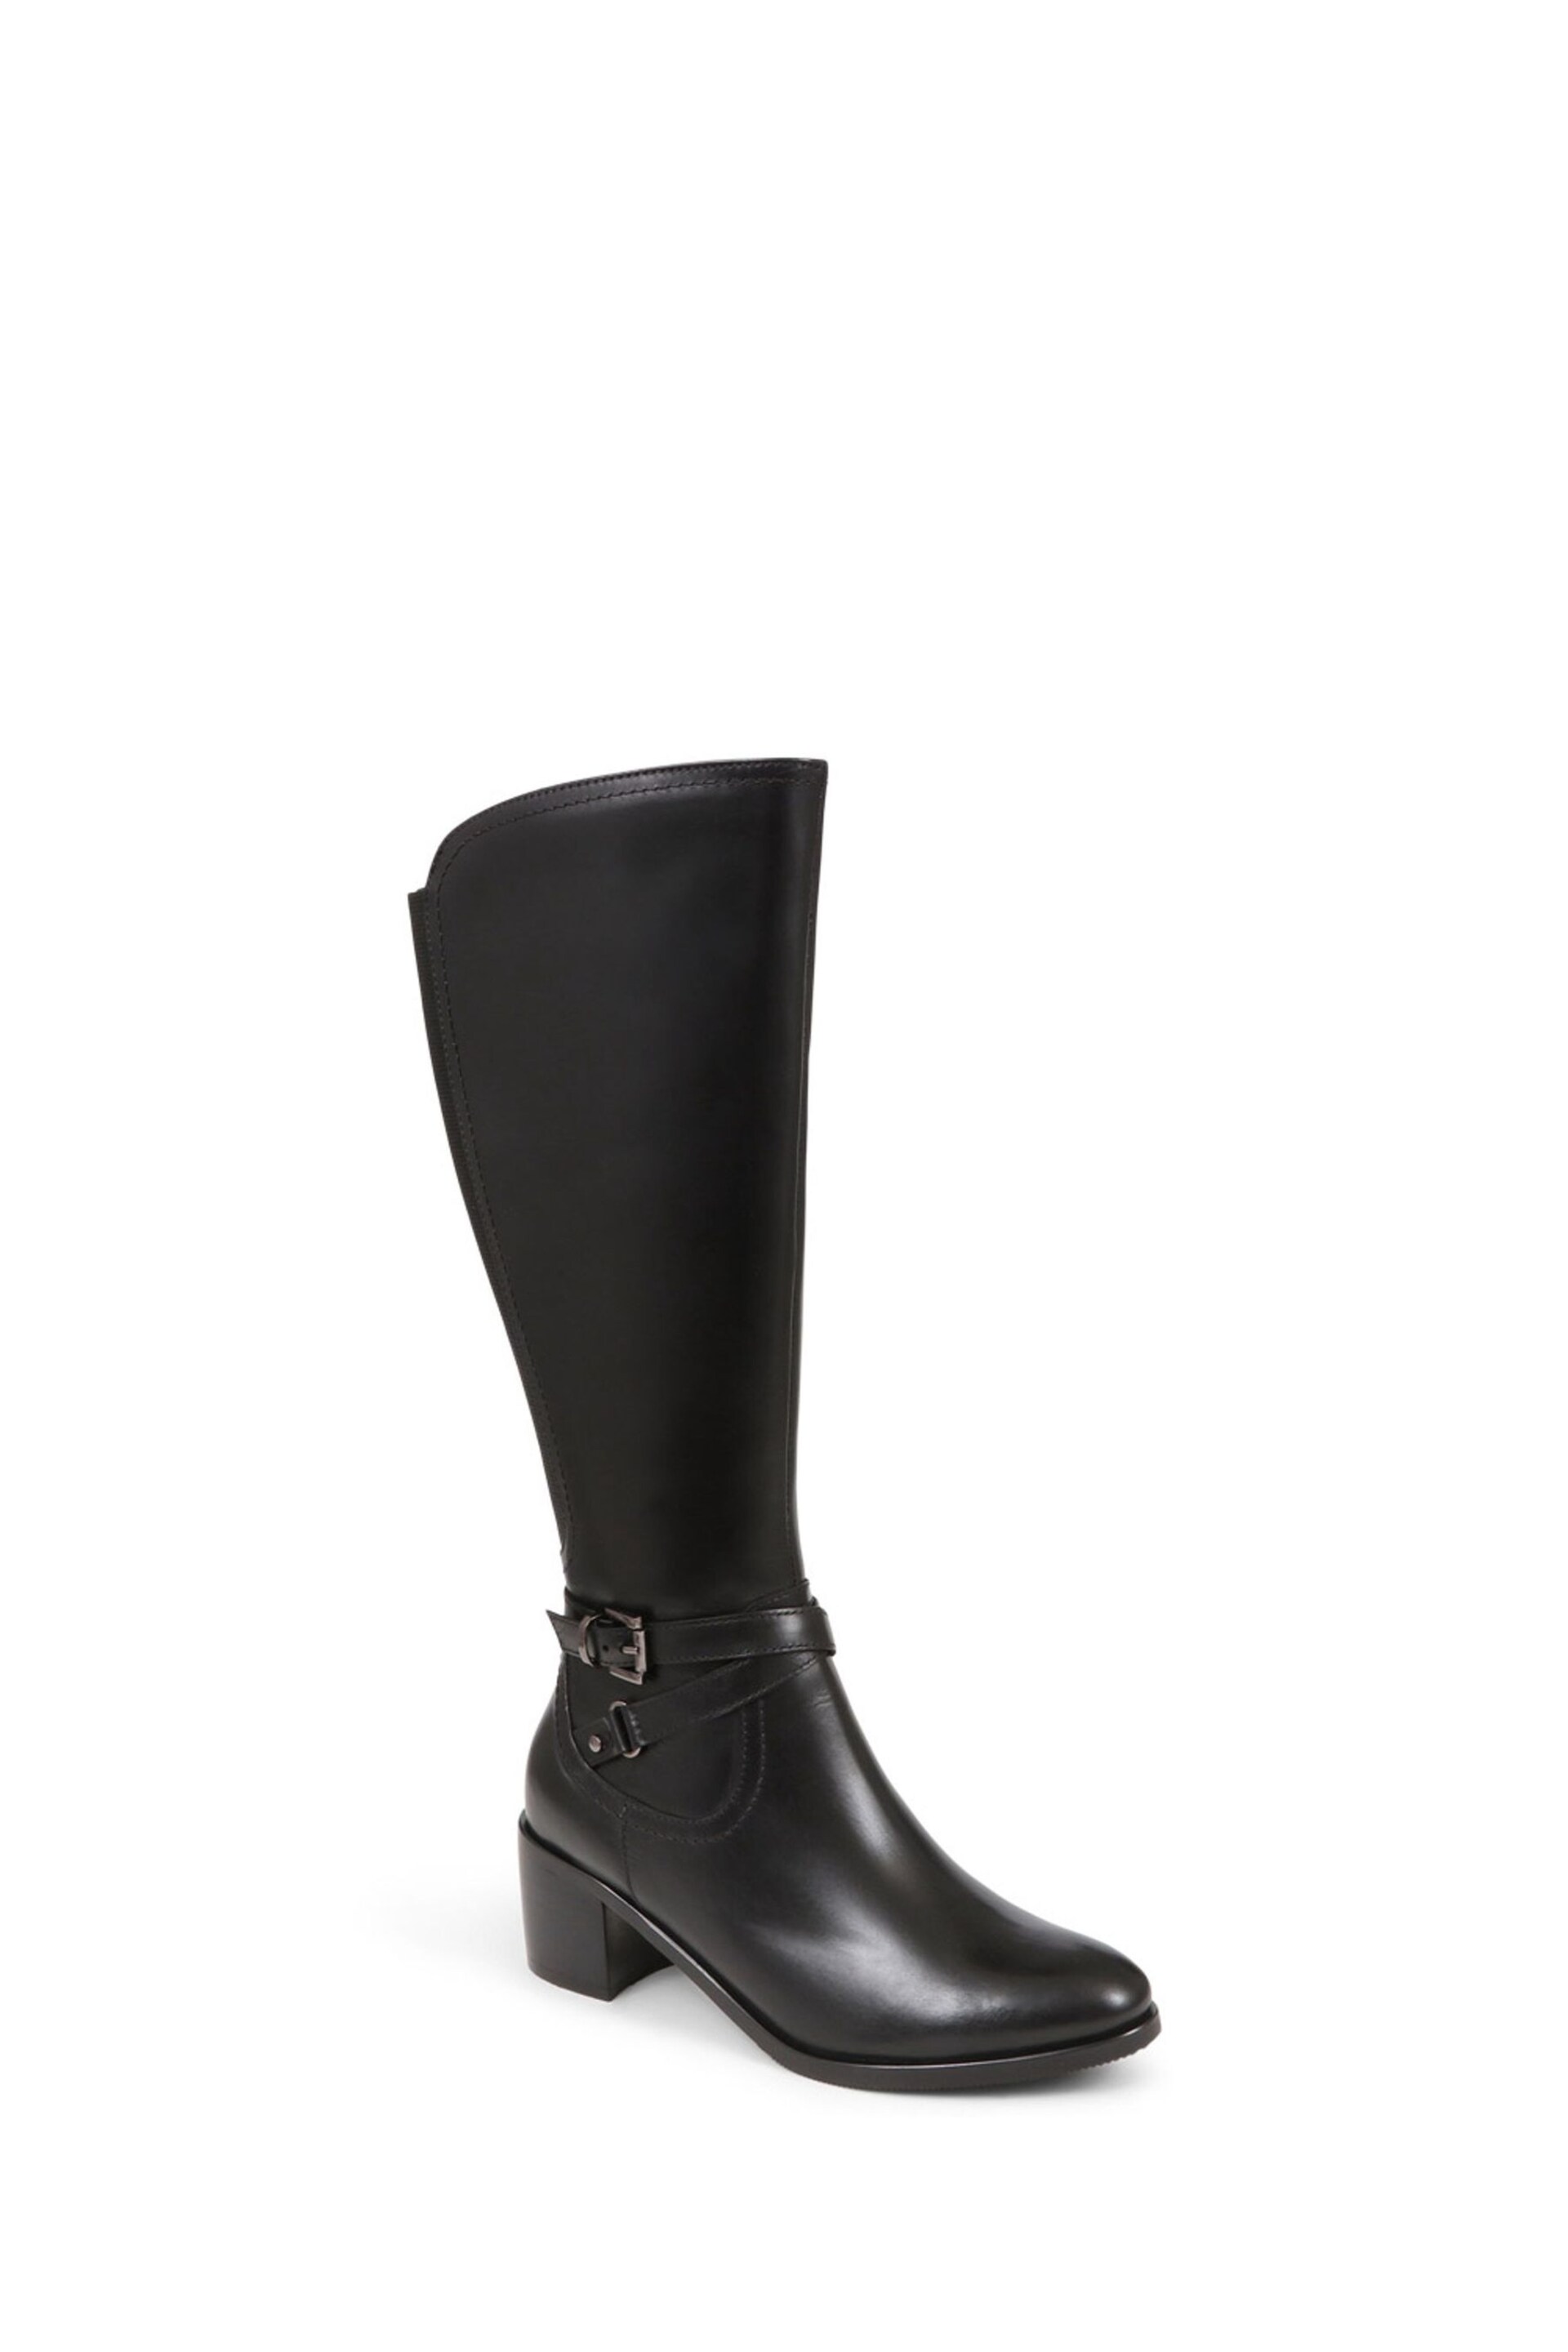 Pavers Smart Tall Black Heeled Boots - Image 2 of 5